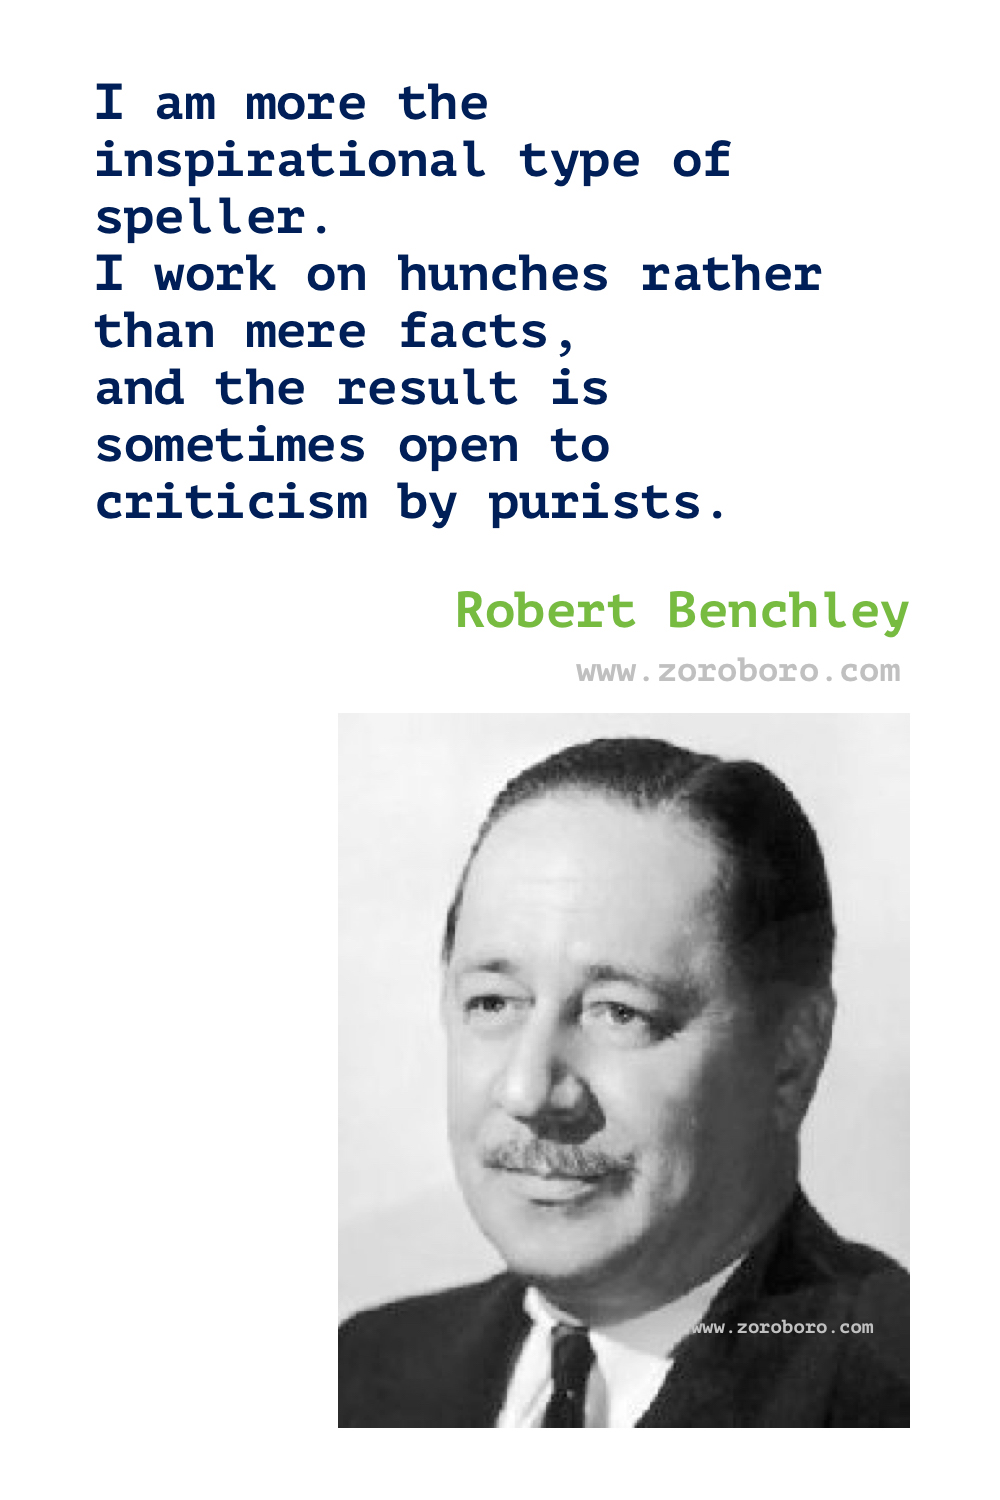 Robert Benchley Quotes. Robert Benchley Comedy Quotes, Dogs Quotes, Funny Quotes, Writing Quotes & Humor Quotes. Robert Benchley Books. Robert Benchley Thoughts.